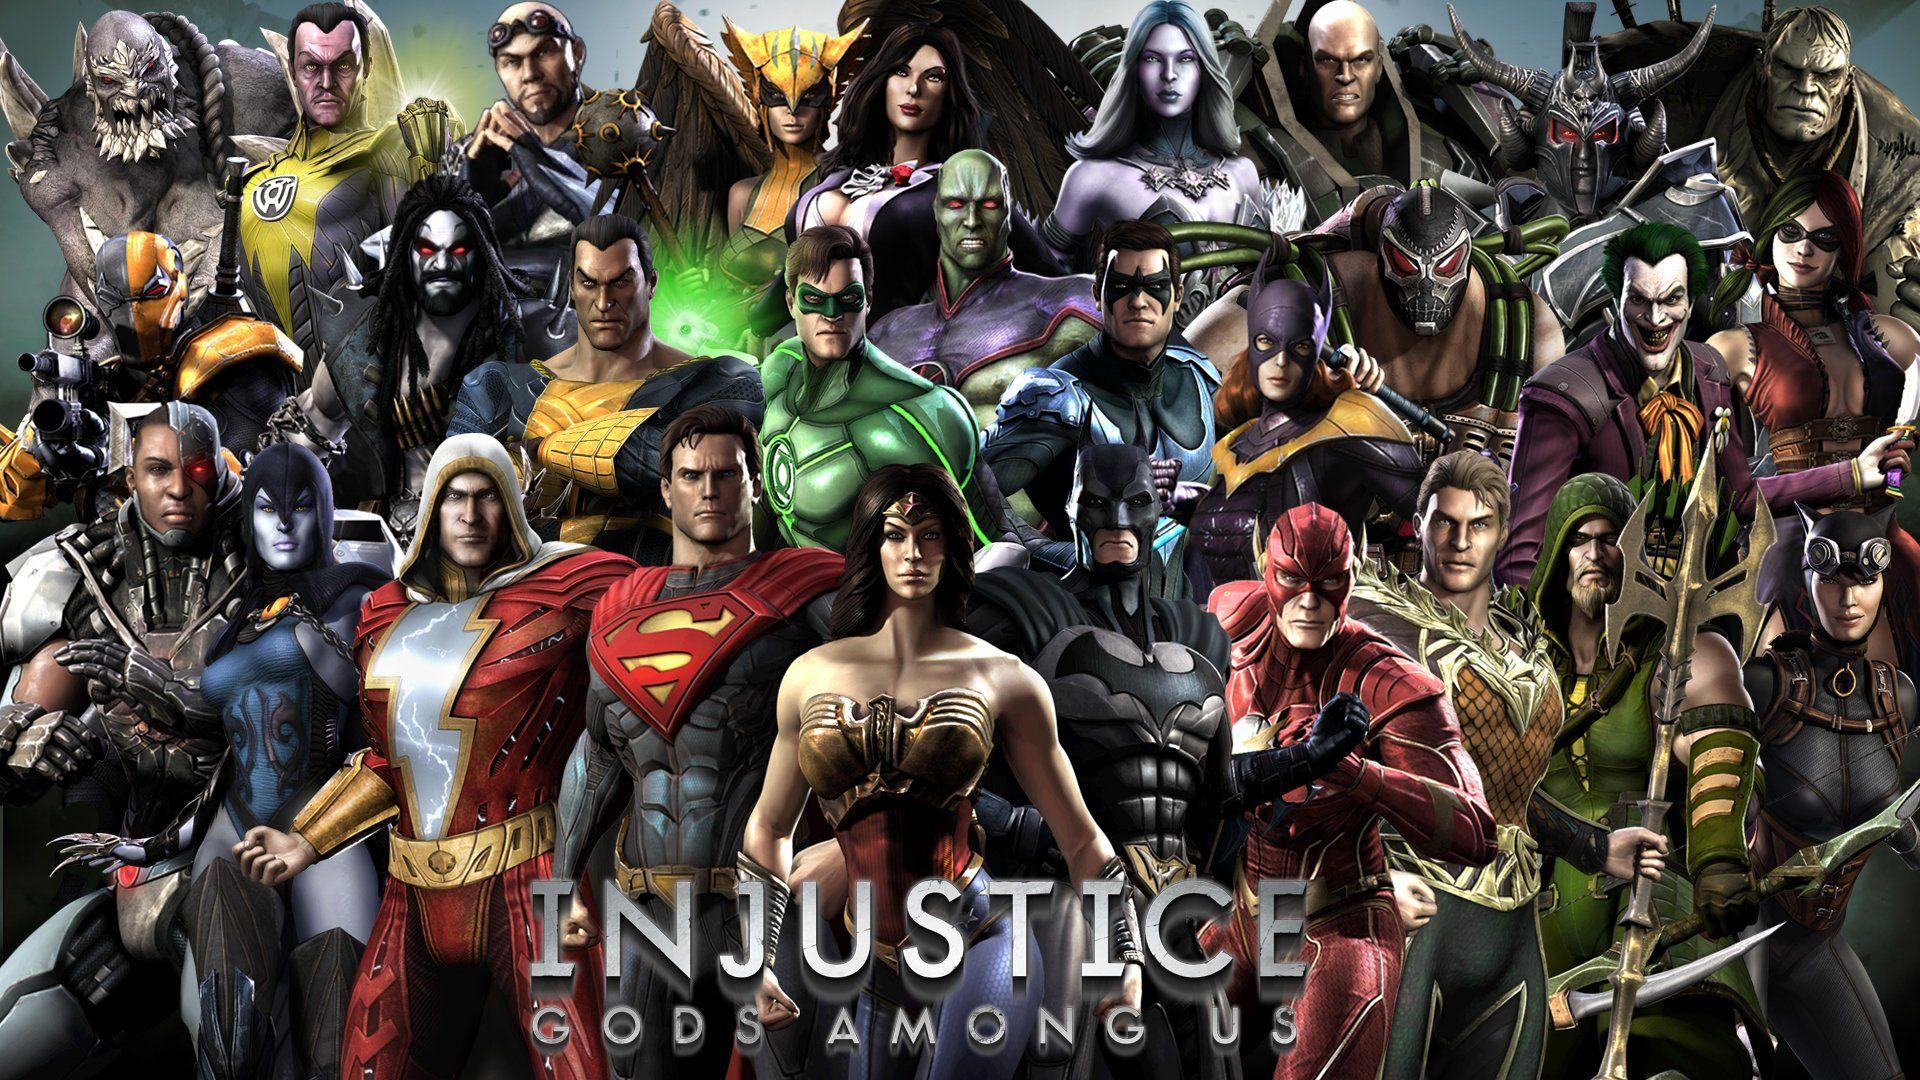 Injustice Gods Among Us Wallpapers Top Free Injustice Gods Among Us Backgrounds Wallpaperaccess